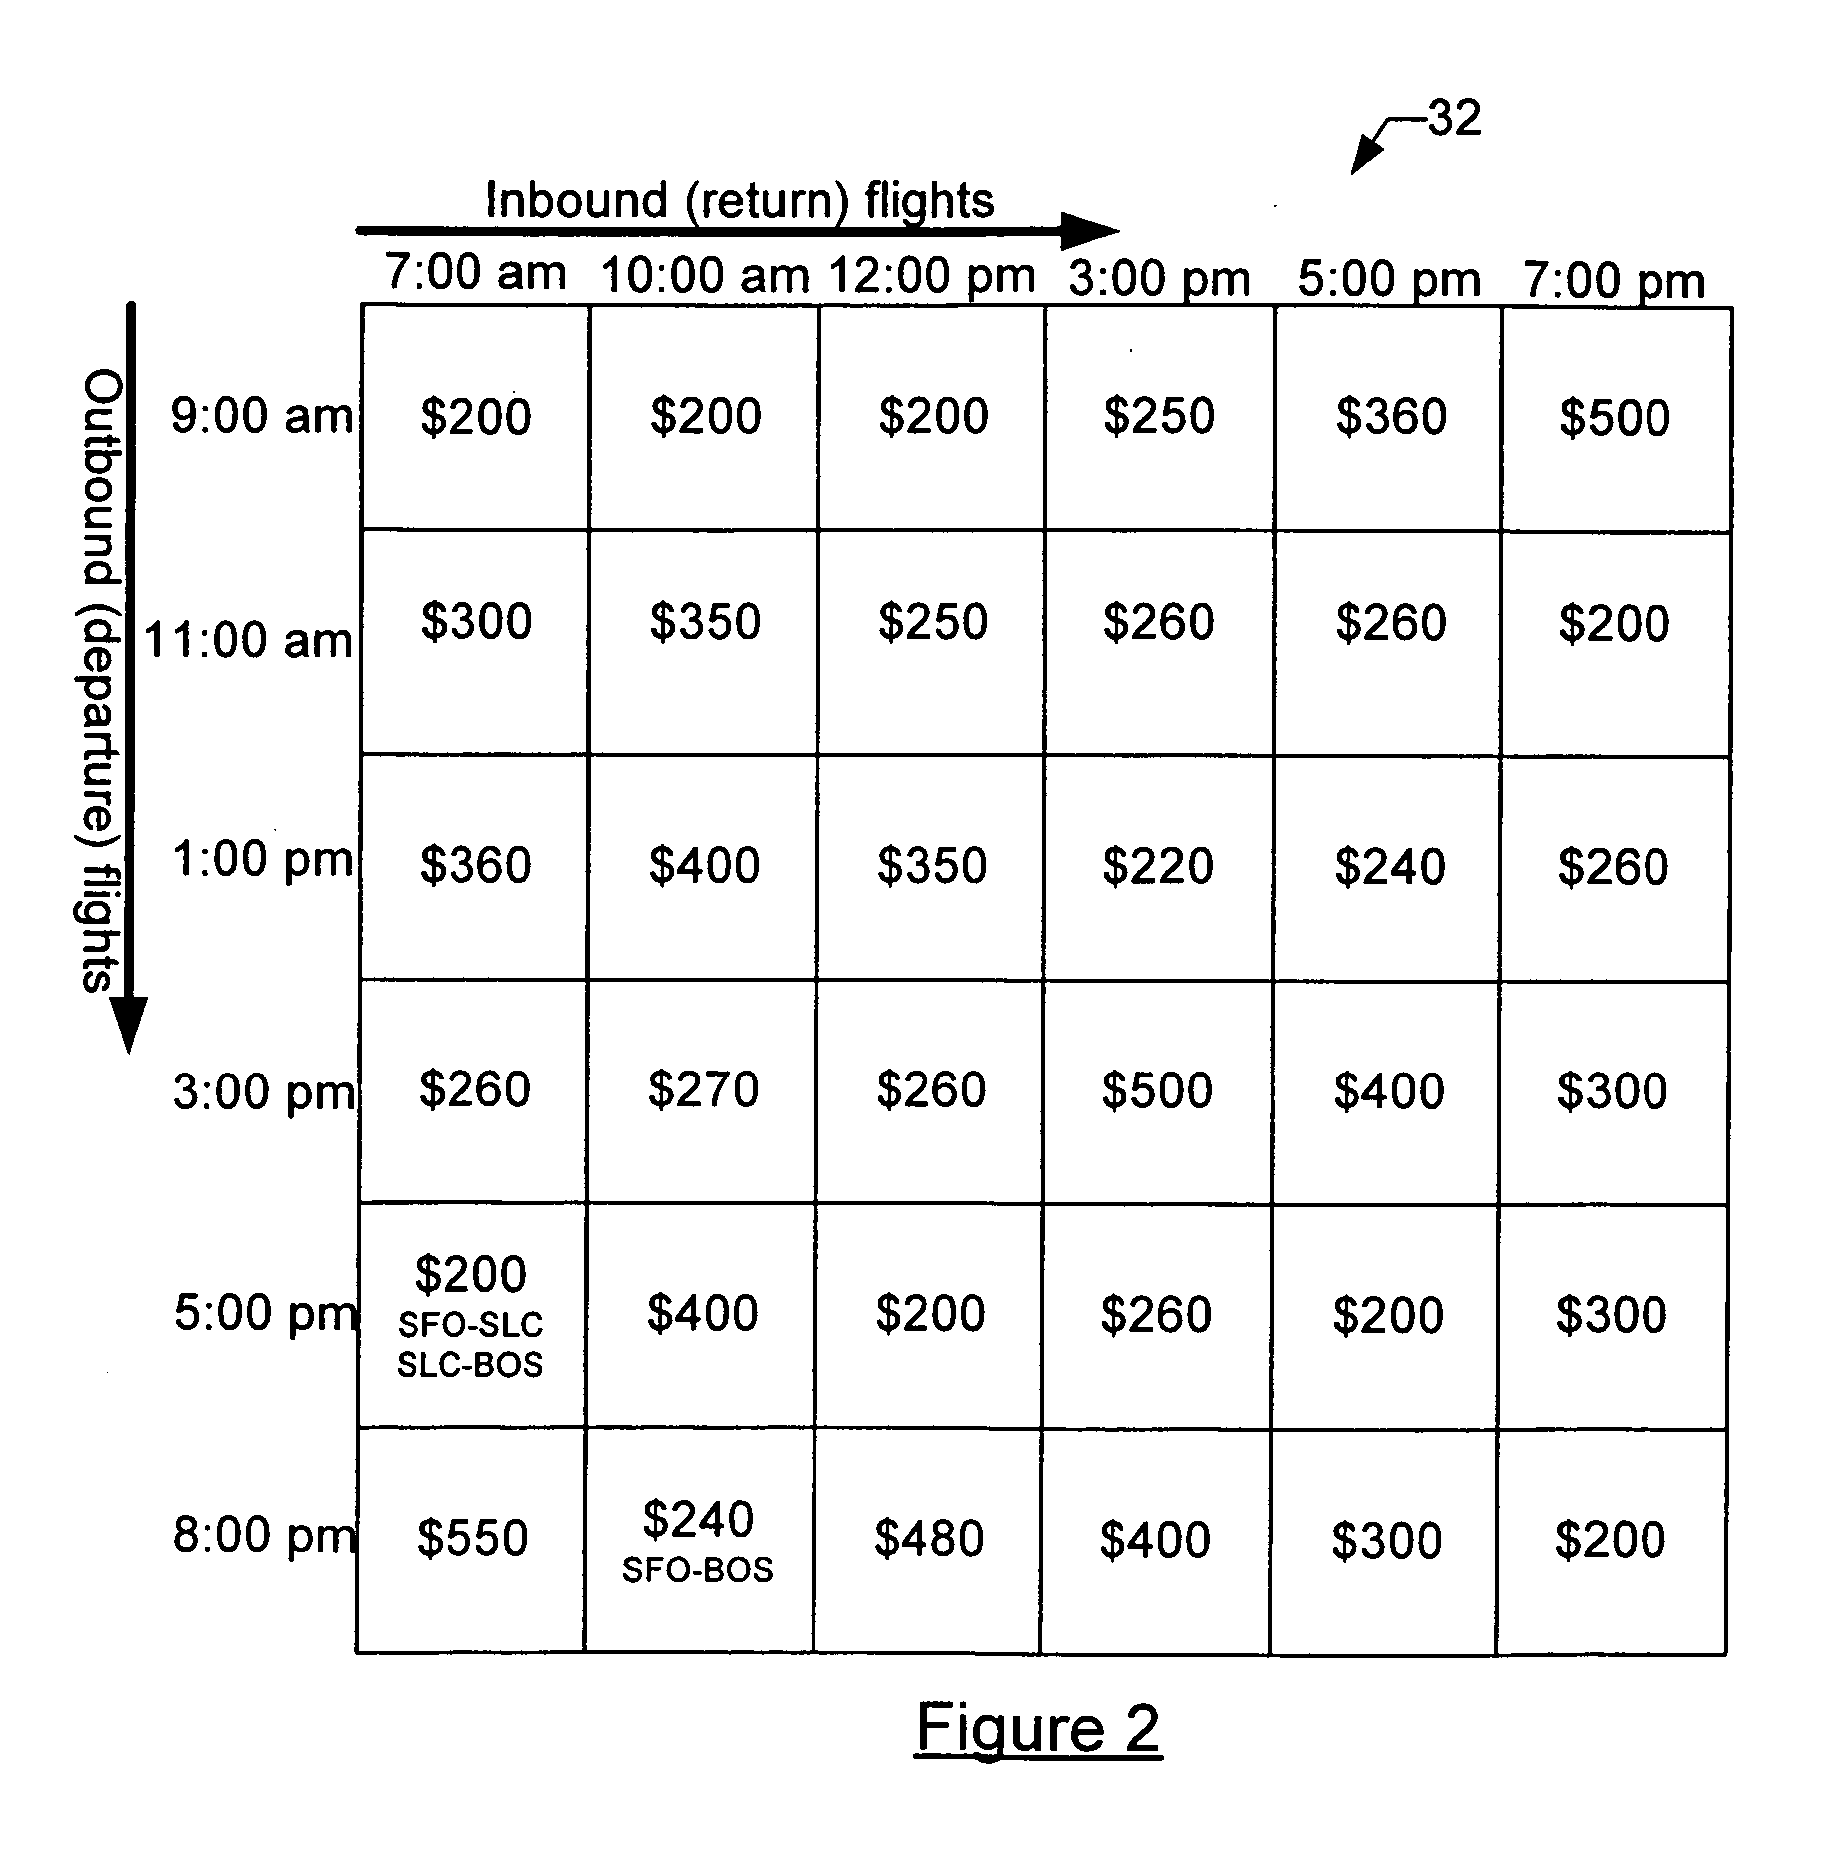 Systems, methods, and computer program products for searching and displaying low cost product availability information for a given departure-return date combination or range of departure-return date combinations